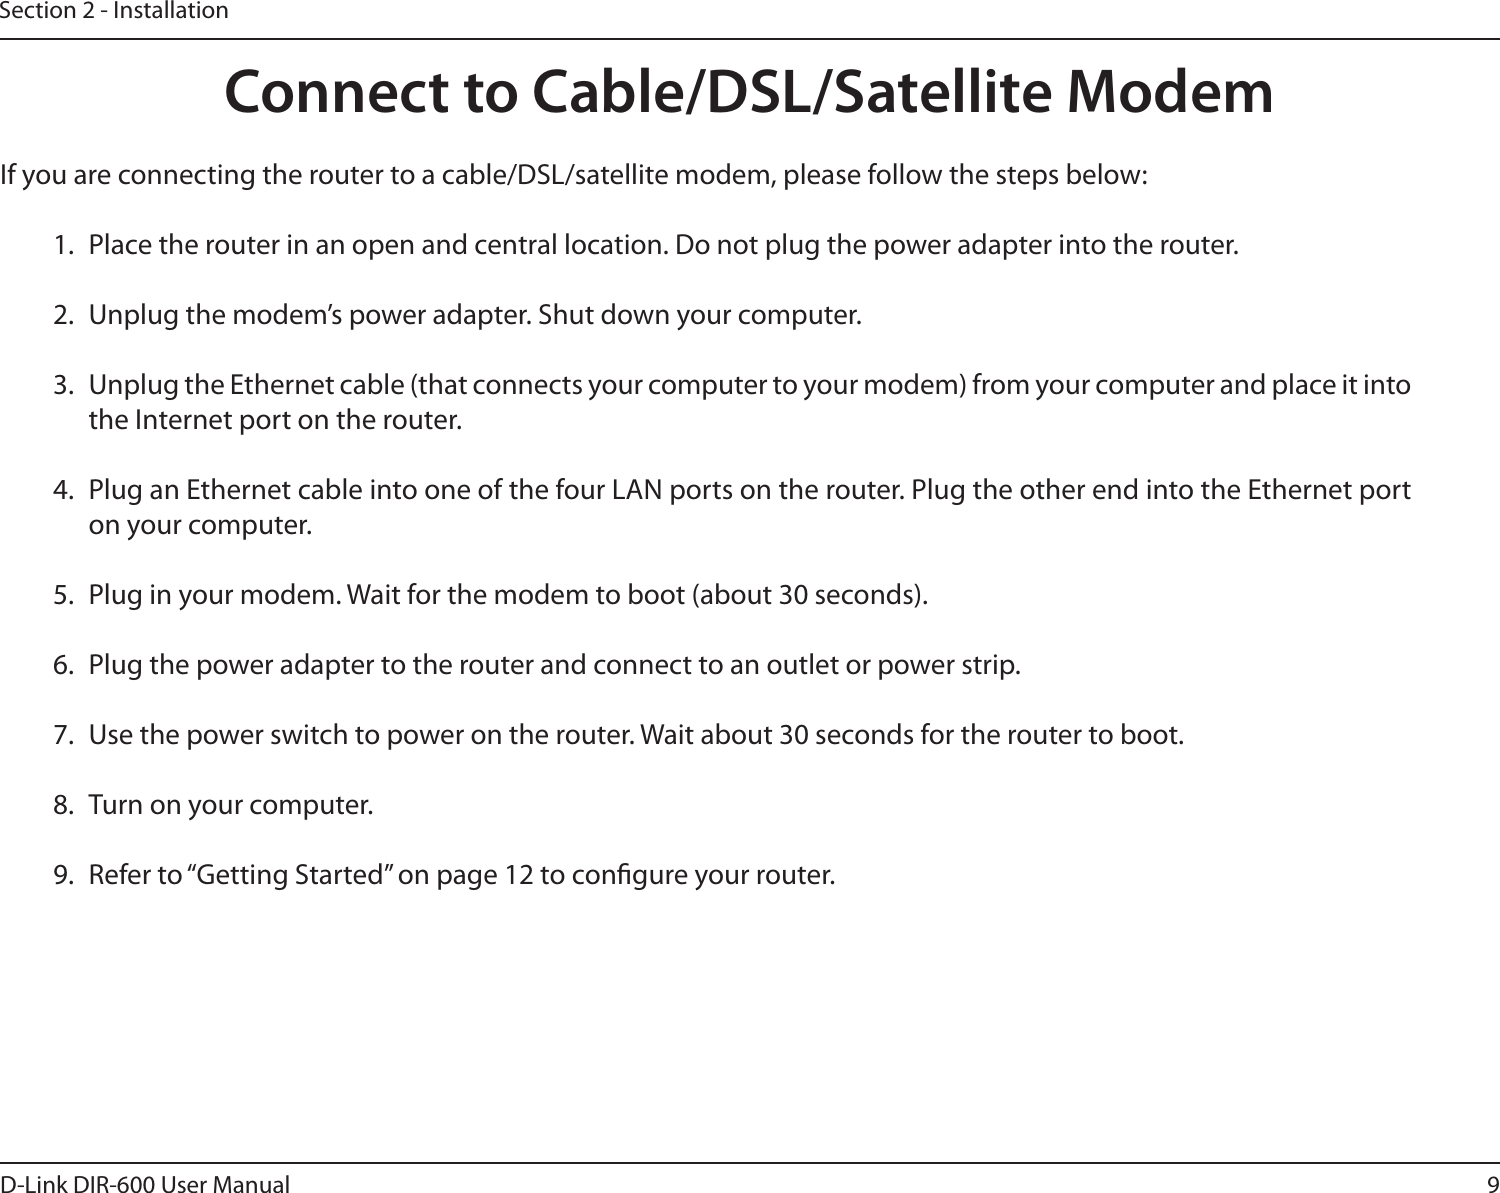 9D-Link DIR-600 User ManualSection 2 - InstallationIf you are connecting the router to a cable/DSL/satellite modem, please follow the steps below:1.  Place the router in an open and central location. Do not plug the power adapter into the router.2.  Unplug the modem’s power adapter. Shut down your computer.3.  Unplug the Ethernet cable (that connects your computer to your modem) from your computer and place it into the Internet port on the router.4.  Plug an Ethernet cable into one of the four LAN ports on the router. Plug the other end into the Ethernet port on your computer.5.  Plug in your modem. Wait for the modem to boot (about 30 seconds).6.  Plug the power adapter to the router and connect to an outlet or power strip. 7.  Use the power switch to power on the router. Wait about 30 seconds for the router to boot.8.  Turn on your computer.9.  Refer to “Getting Started” on page 12 to congure your router.Connect to Cable/DSL/Satellite Modem